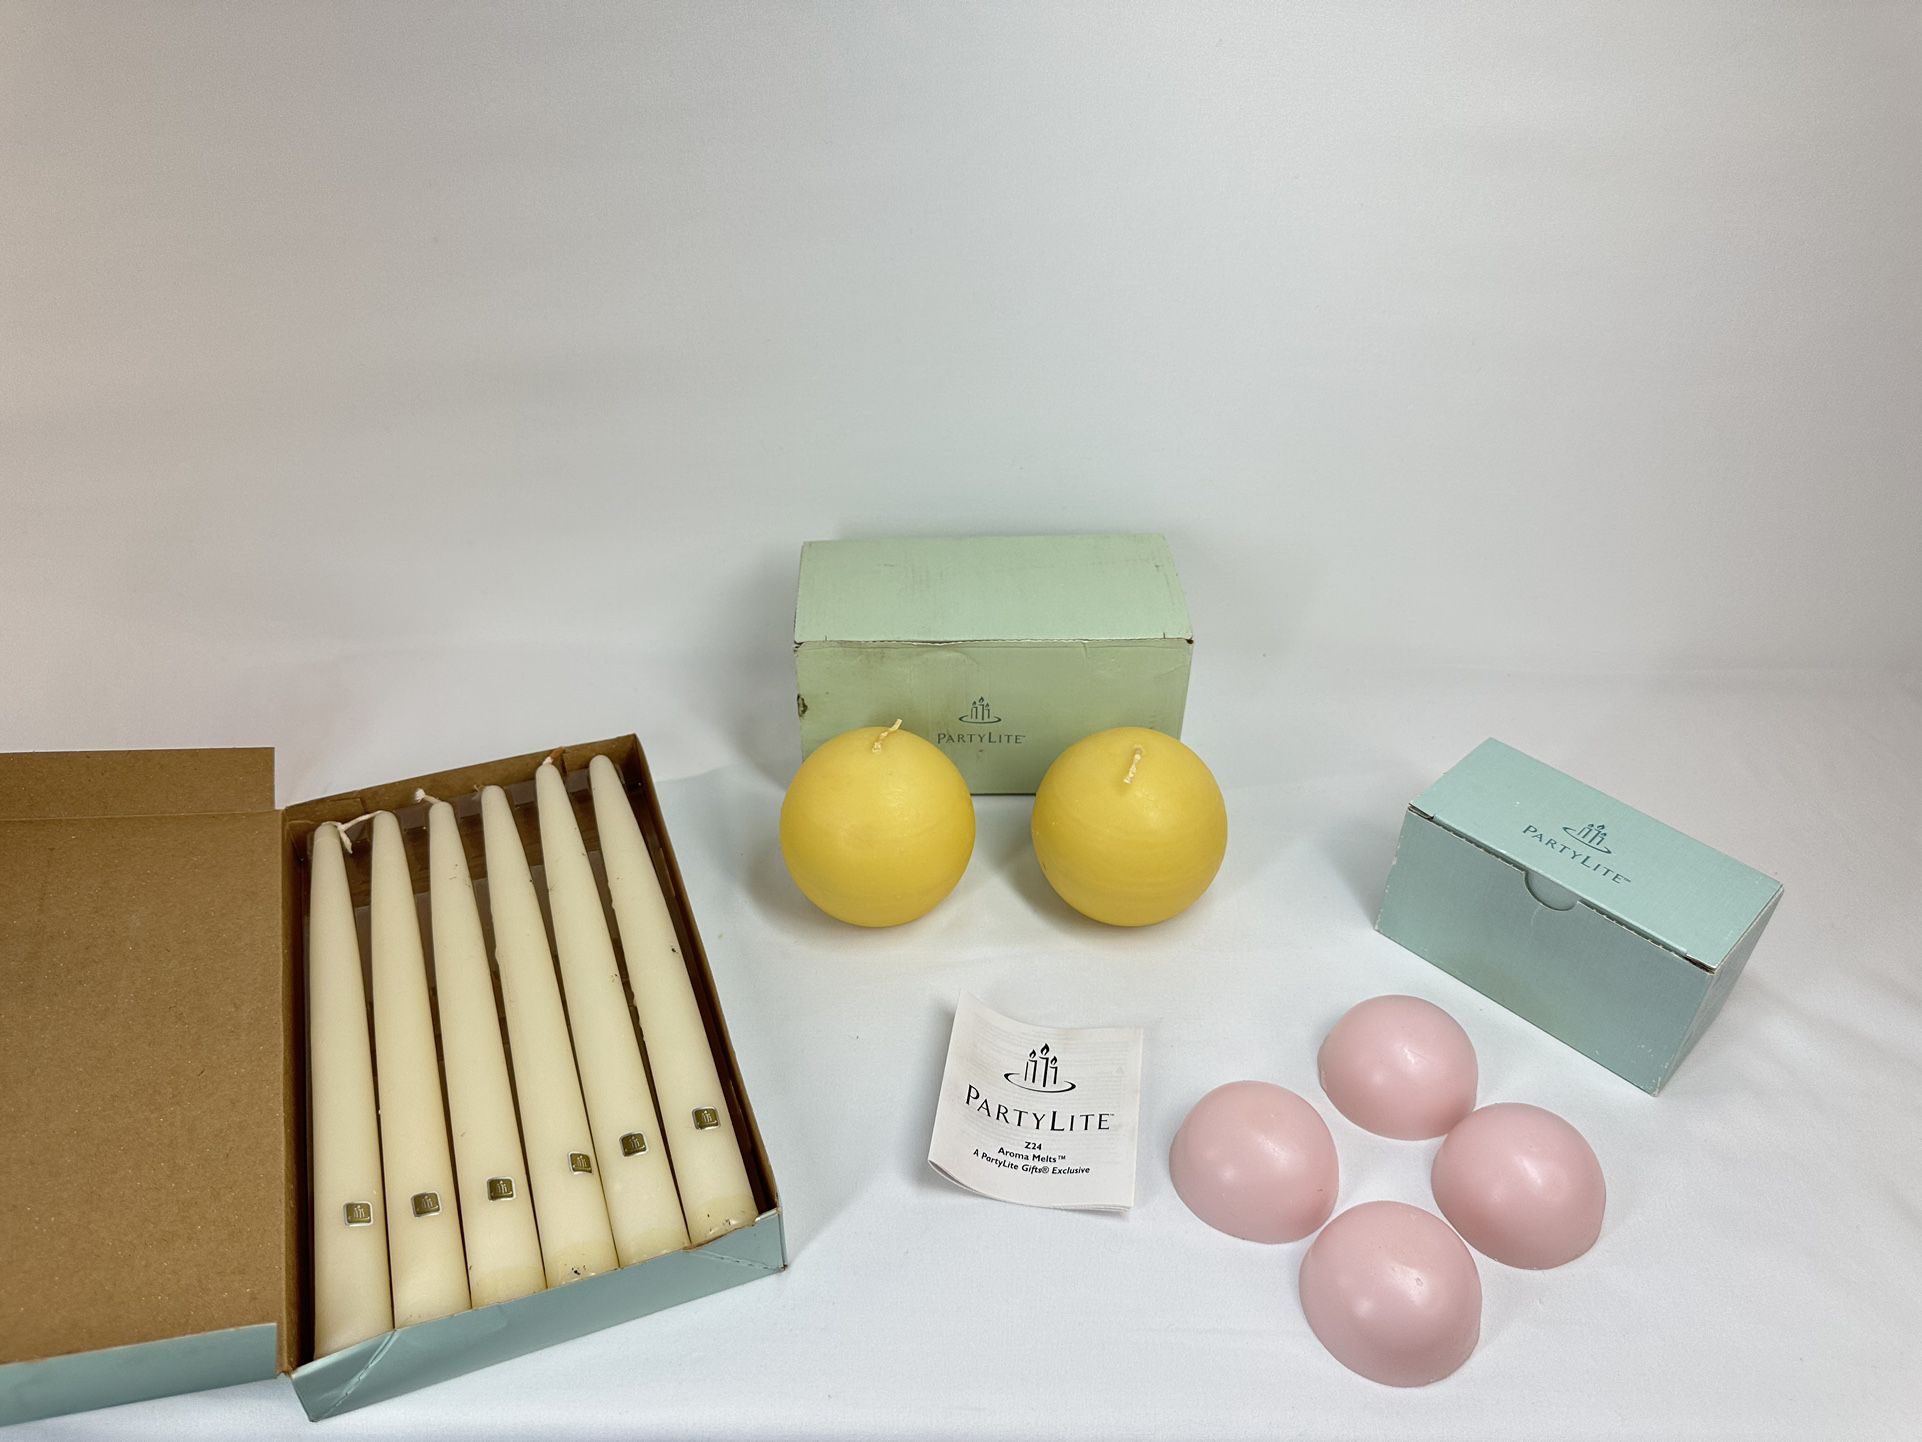 #1757 PartyLite Aroma, Ball Candles, Scent PartyLite 6 Pack 10" Taper Candles.